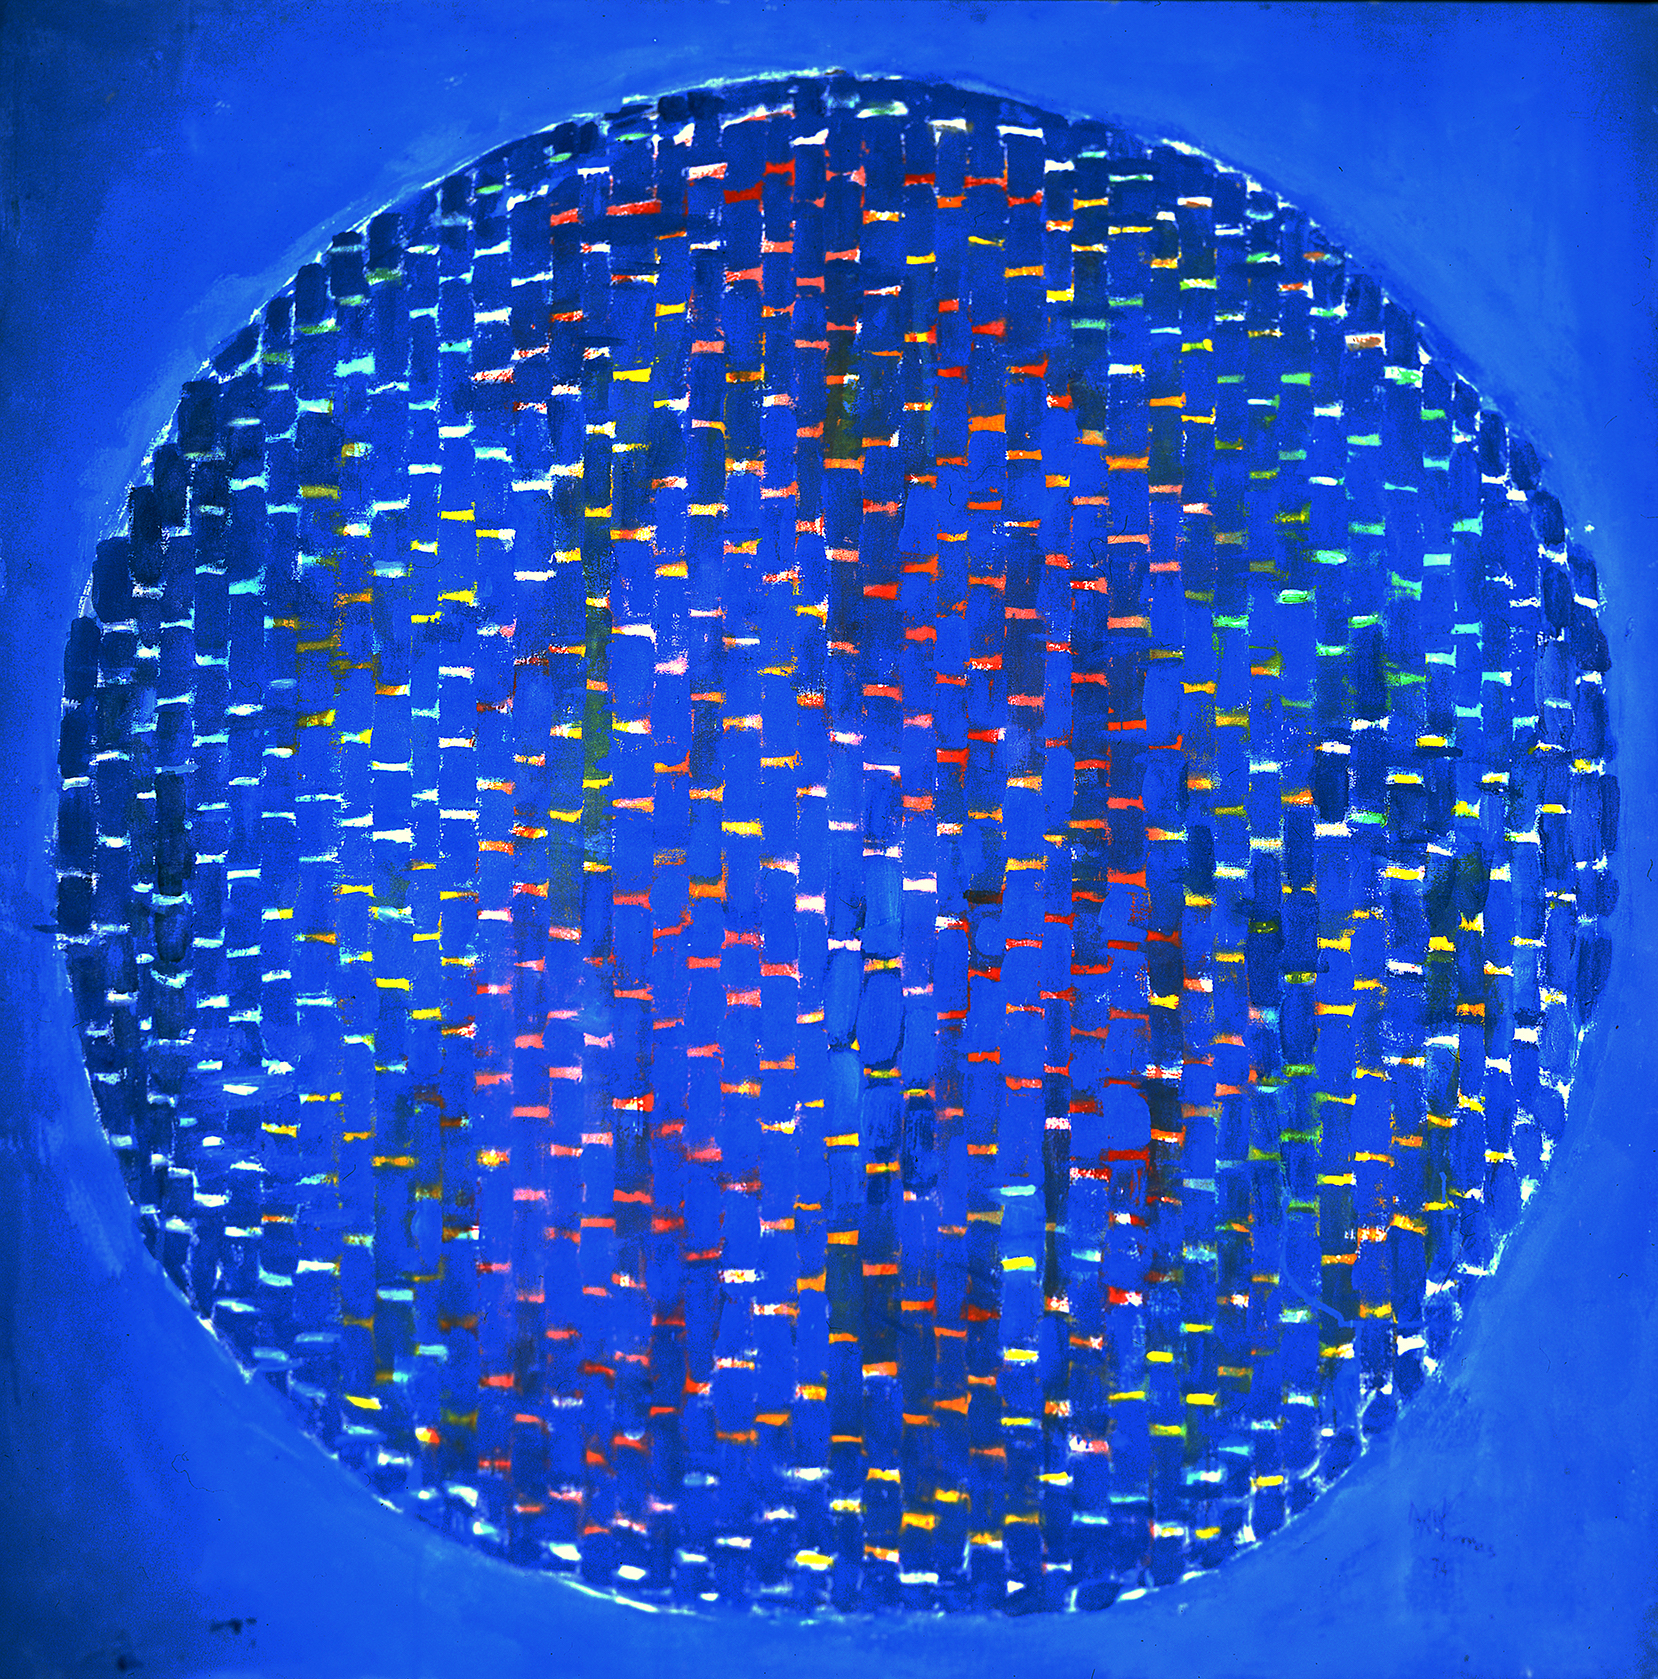 Alma Thomas, Astronauts Glimpse of the Earth, 1974, acrylic on canvas, 50½ x 50½ inches, gift of Mr. and Mrs. Jacob Kainen, Smithsonian National Air and Space Museum.